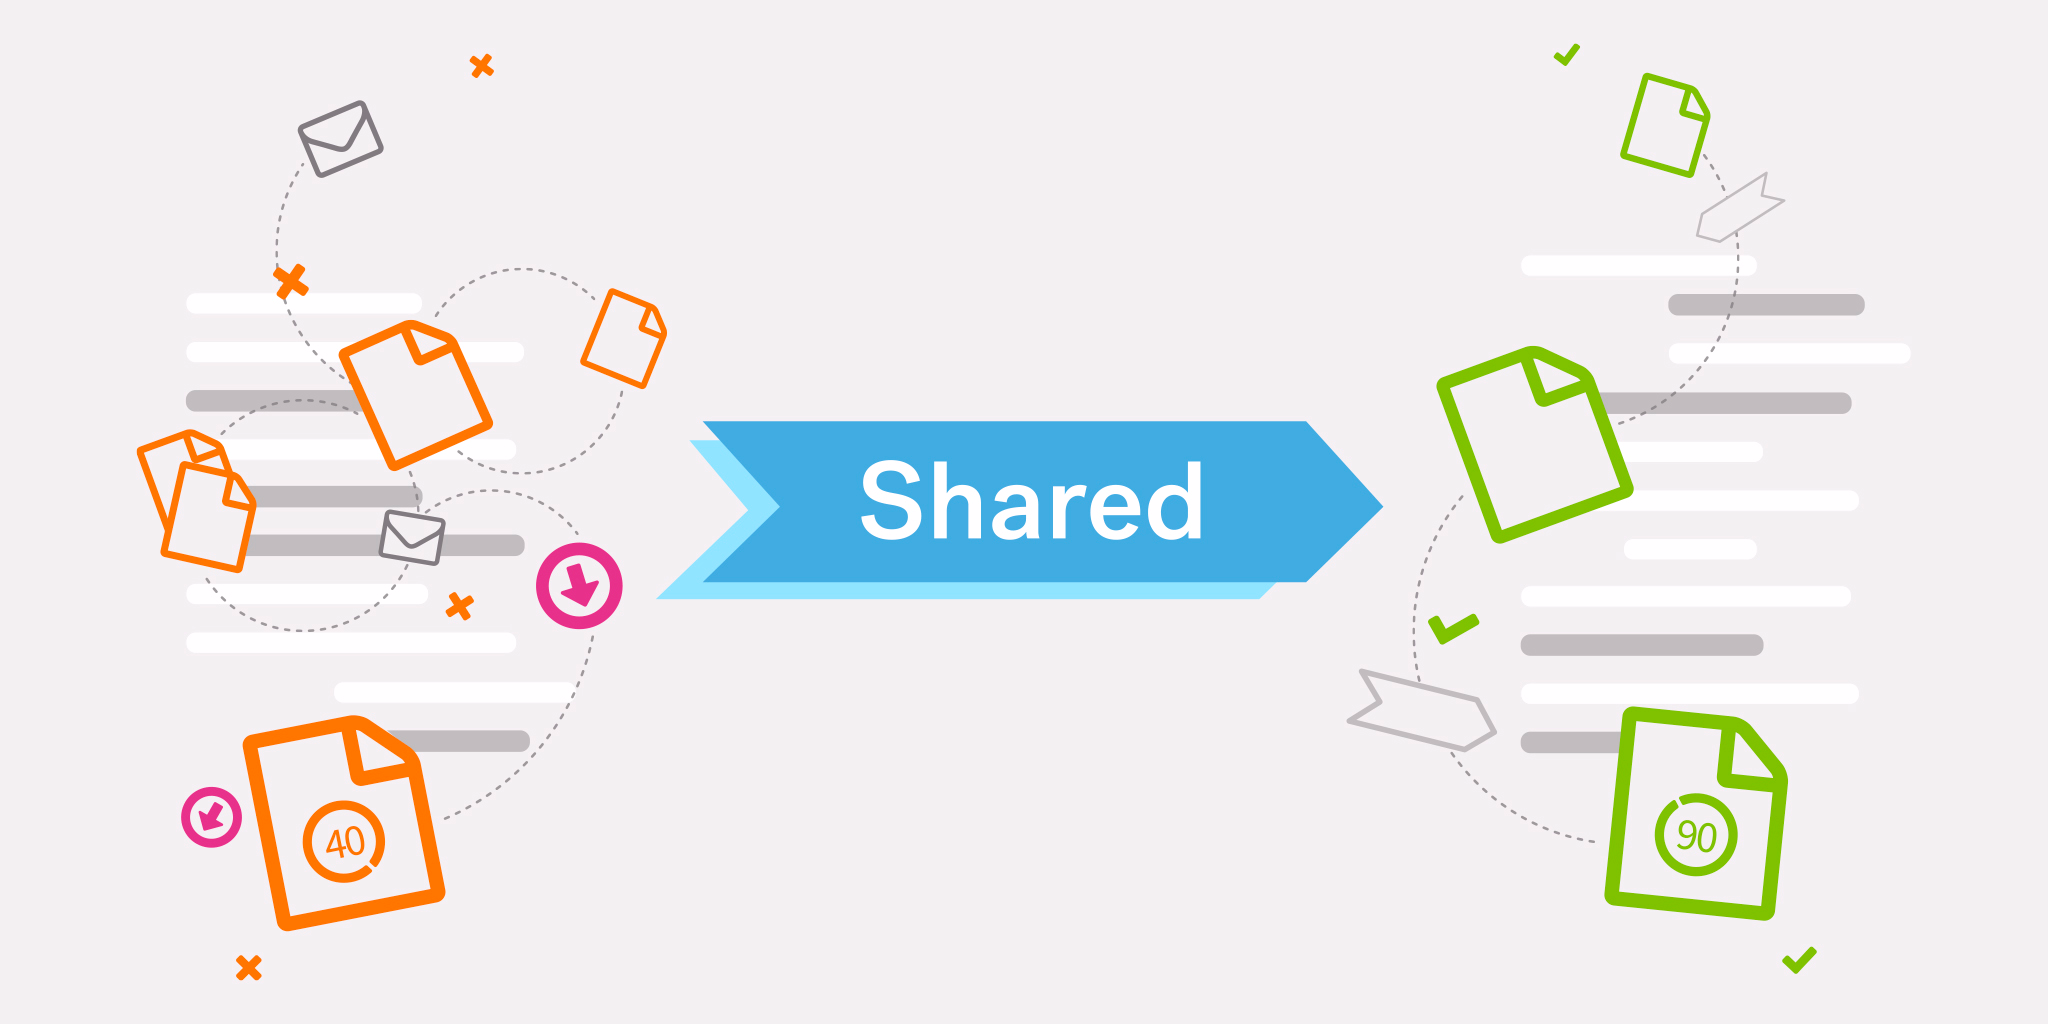 Documents, emails and content floating around a button with the word shared